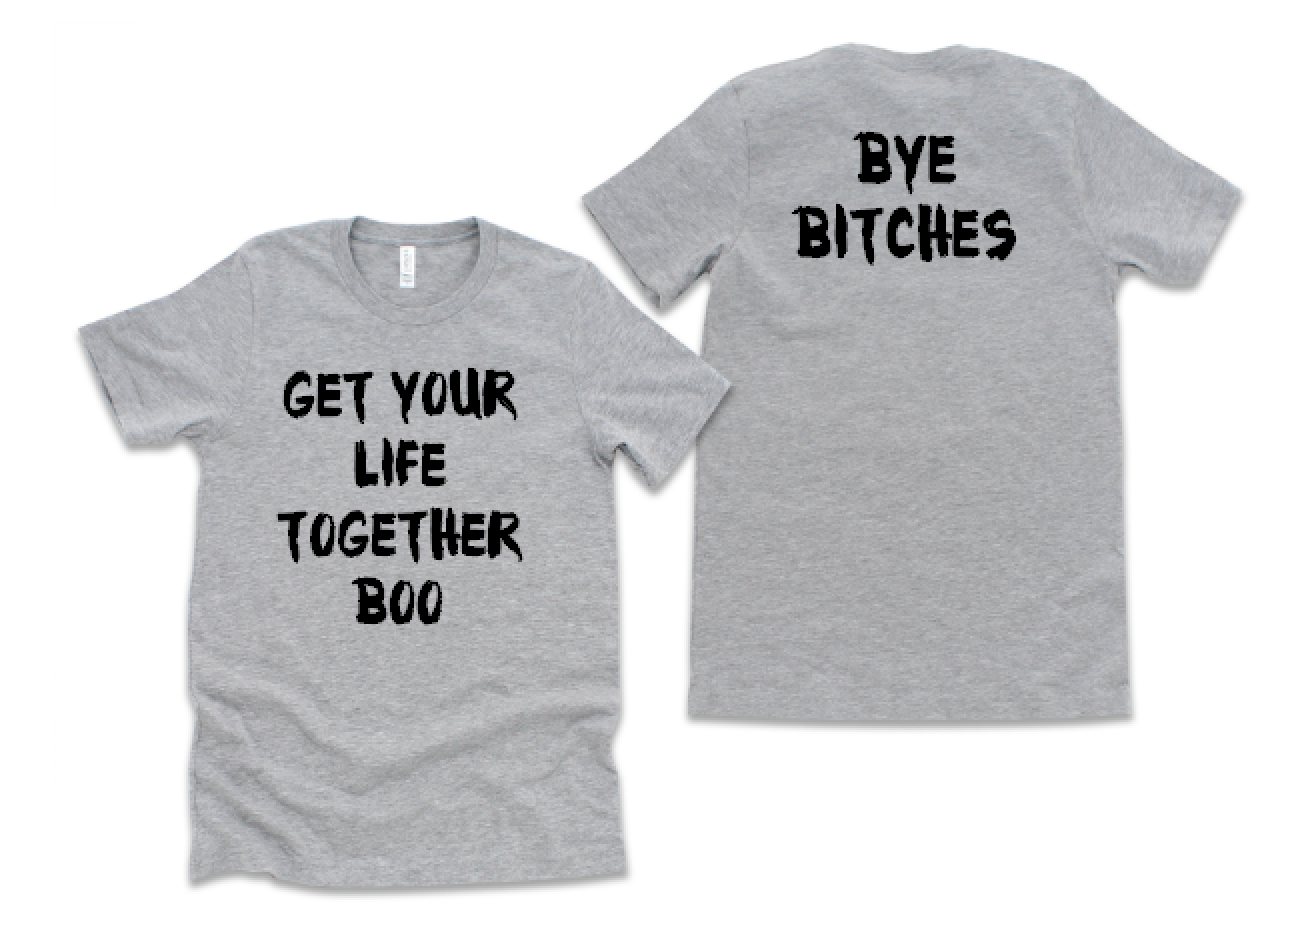 Get Your Life Together Boo and Bye Bitches - Unisex Tee